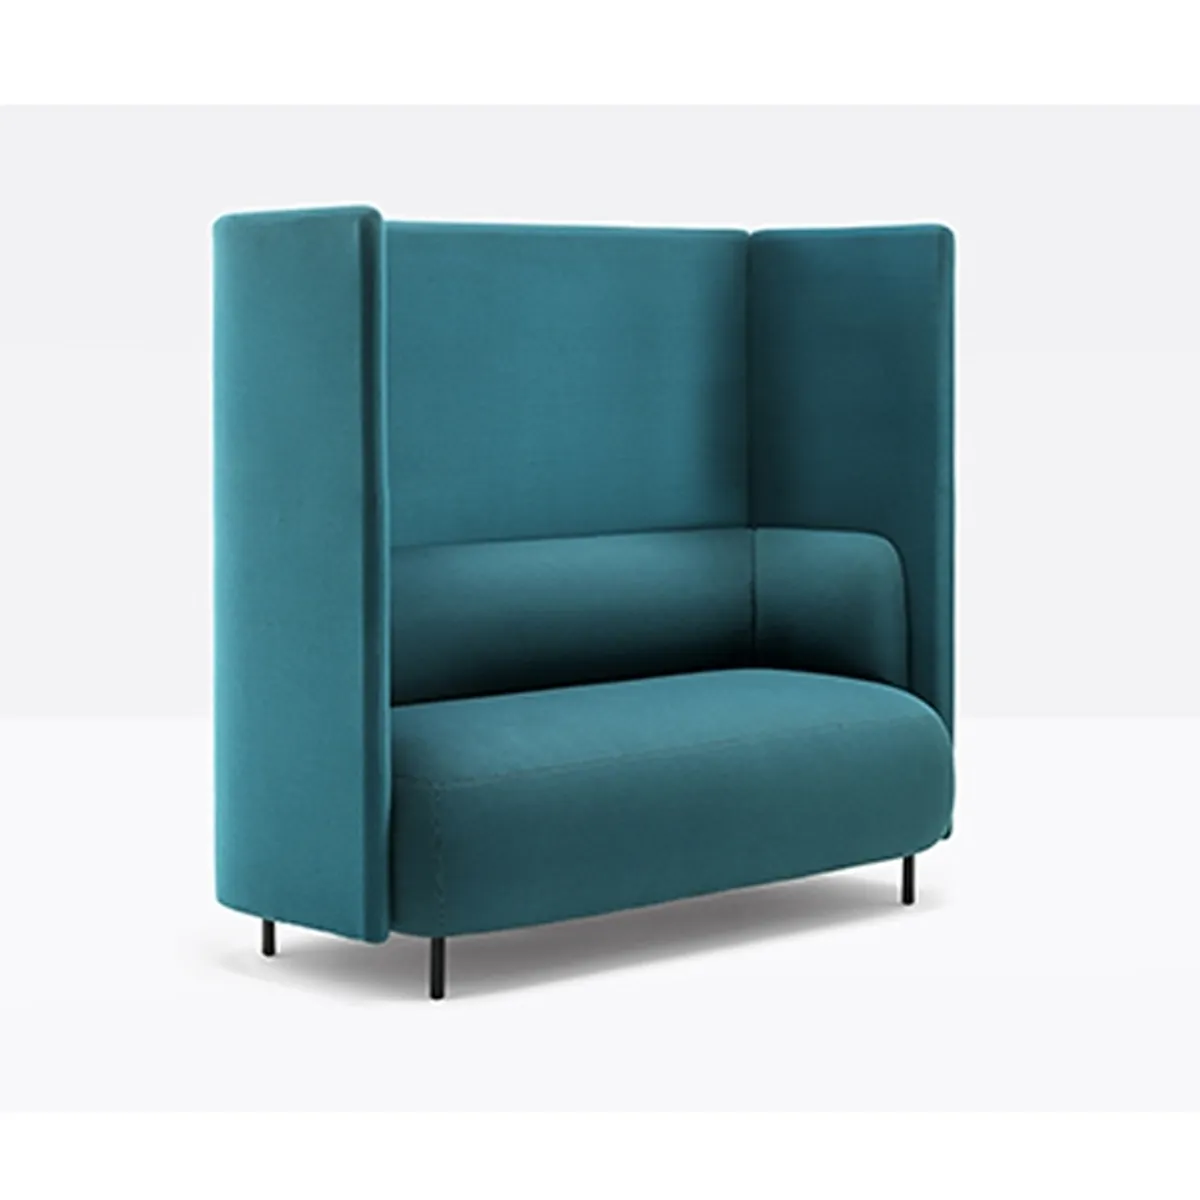 Buddy hub sofa Inside Out Contracts2